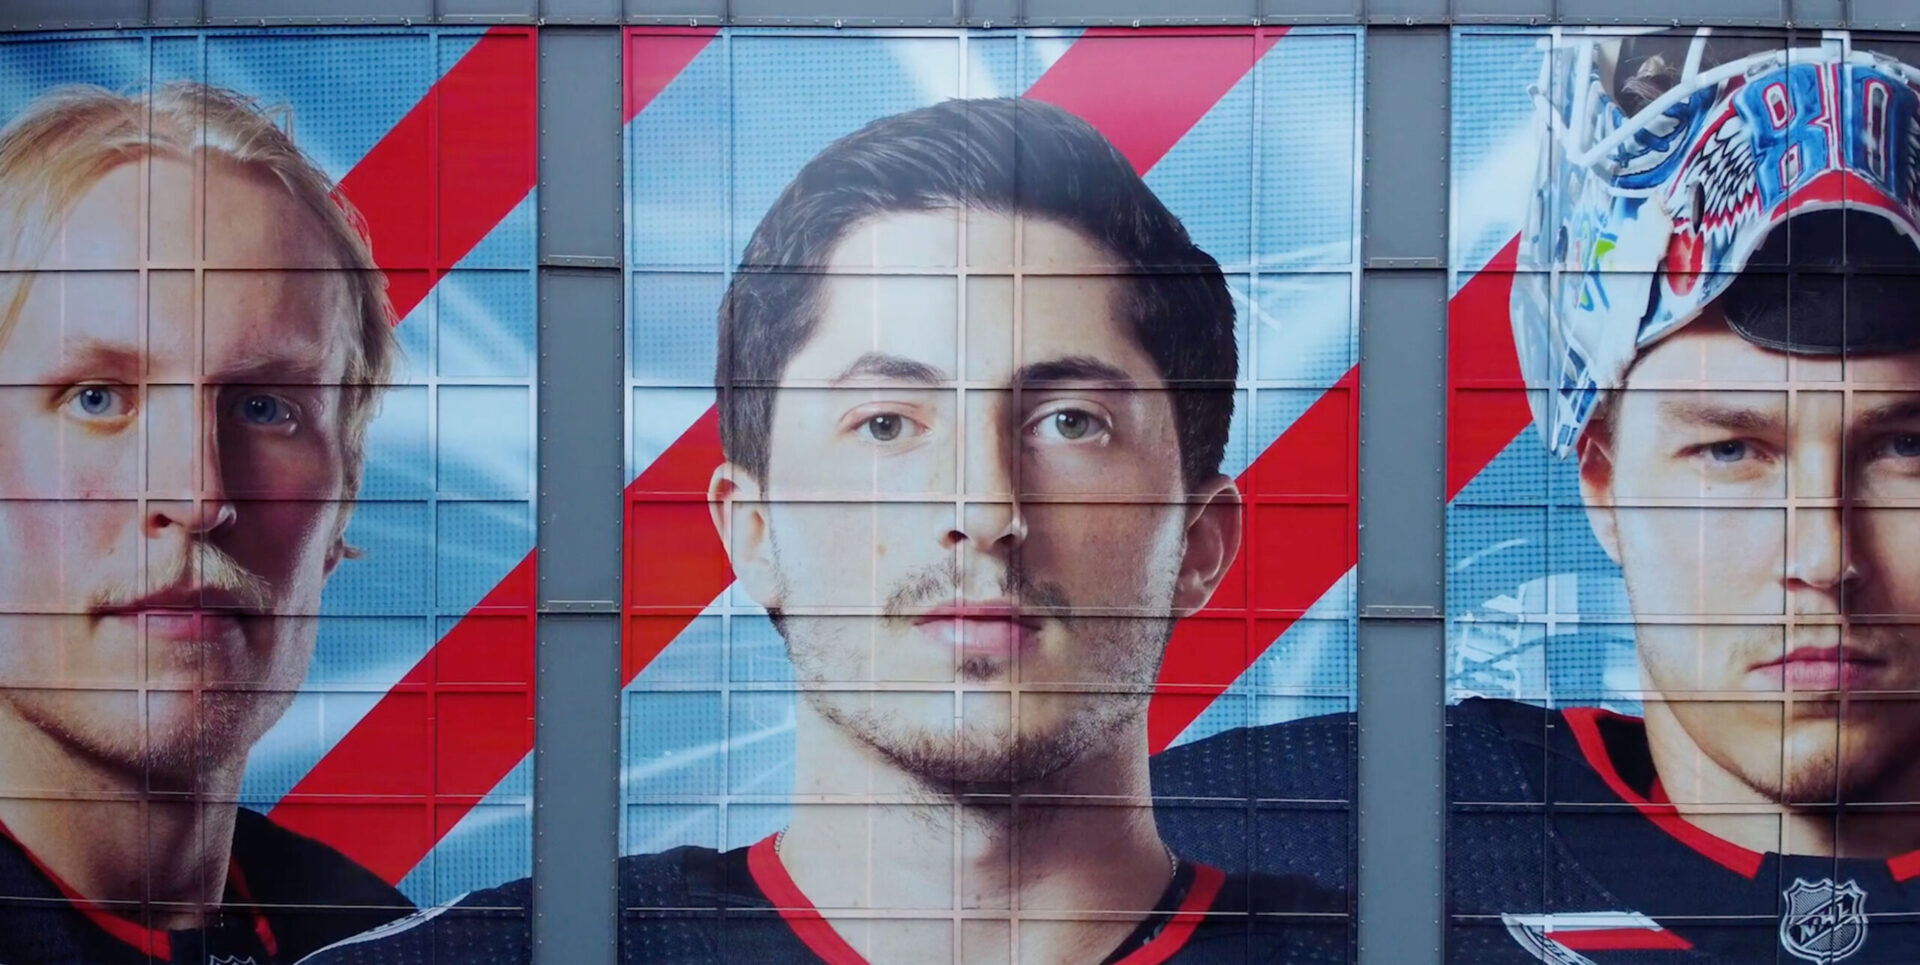 Large mural of Columbus Blue Jackets hockey players' faces, overlaid on dynamic red and blue stripes.